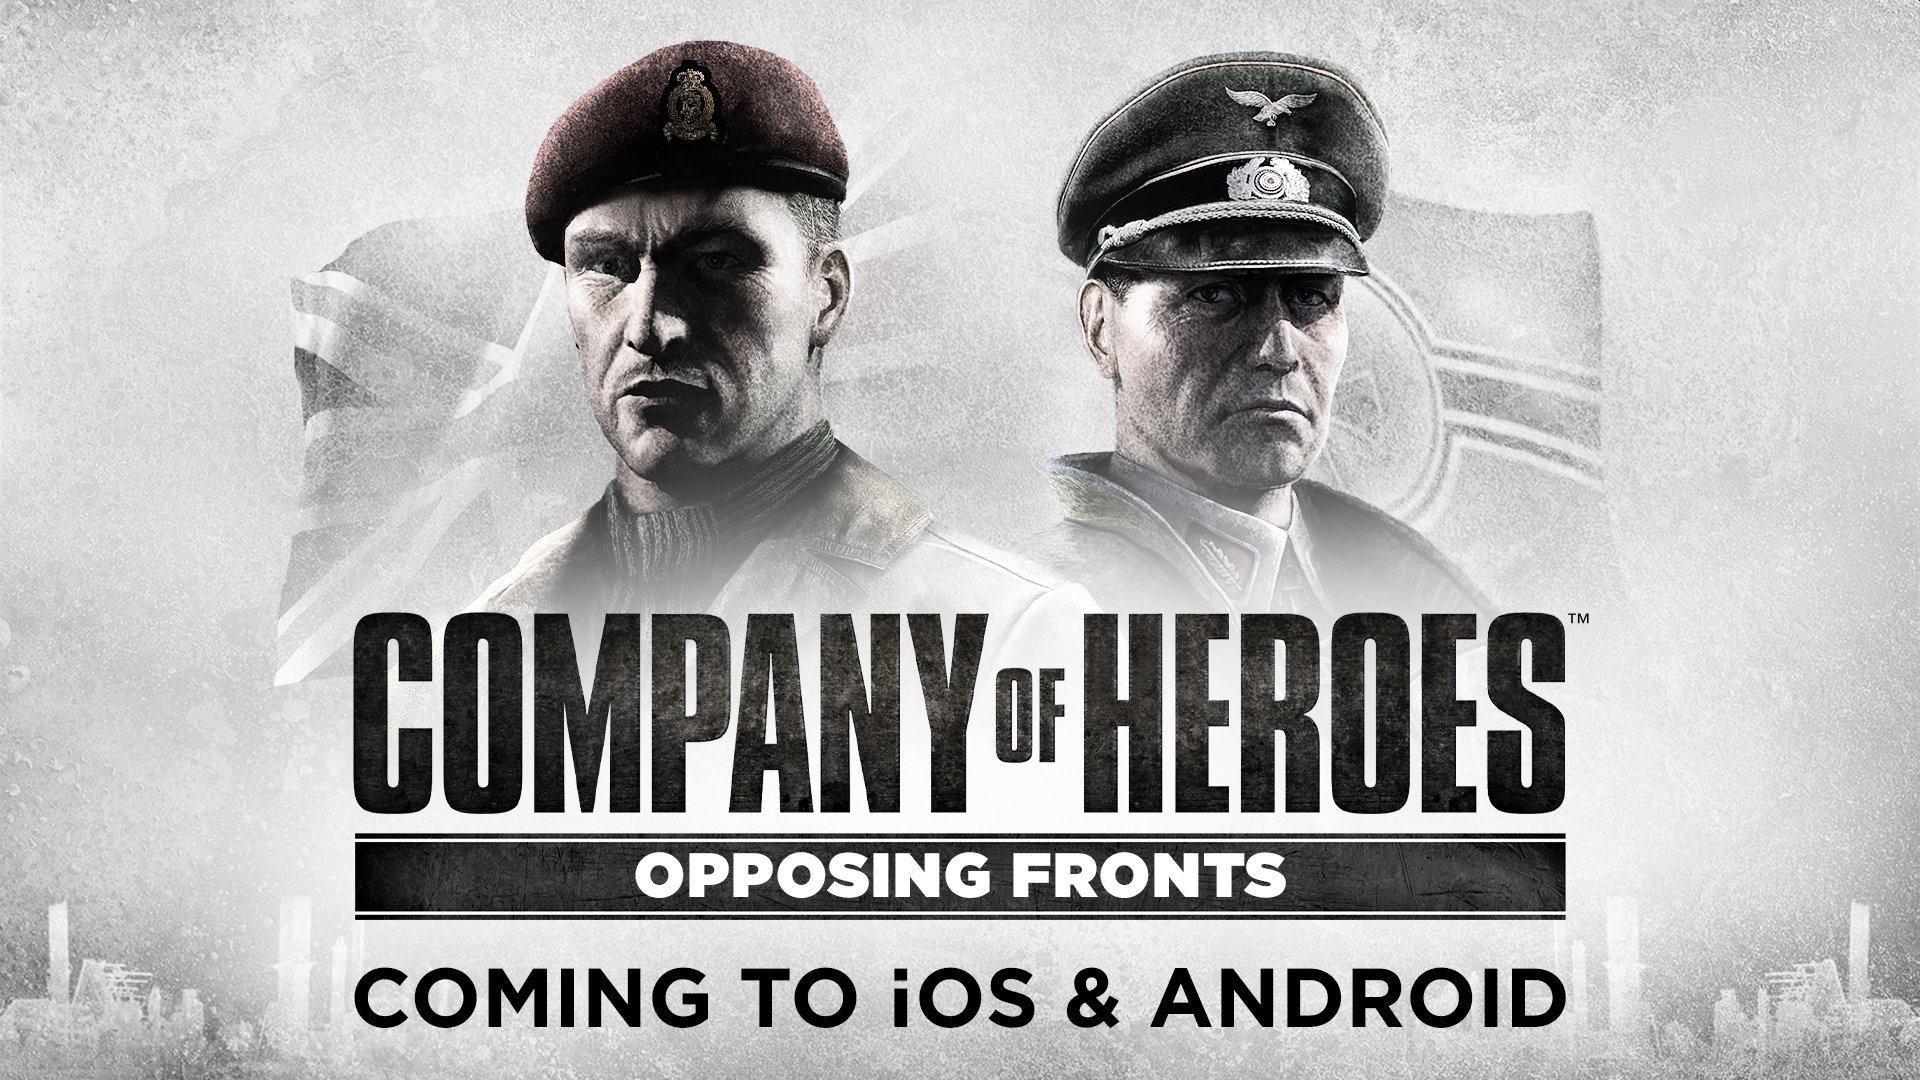 Company of Heroes: Opposing Fronts DLC Expansion Launches On Mobile This Year